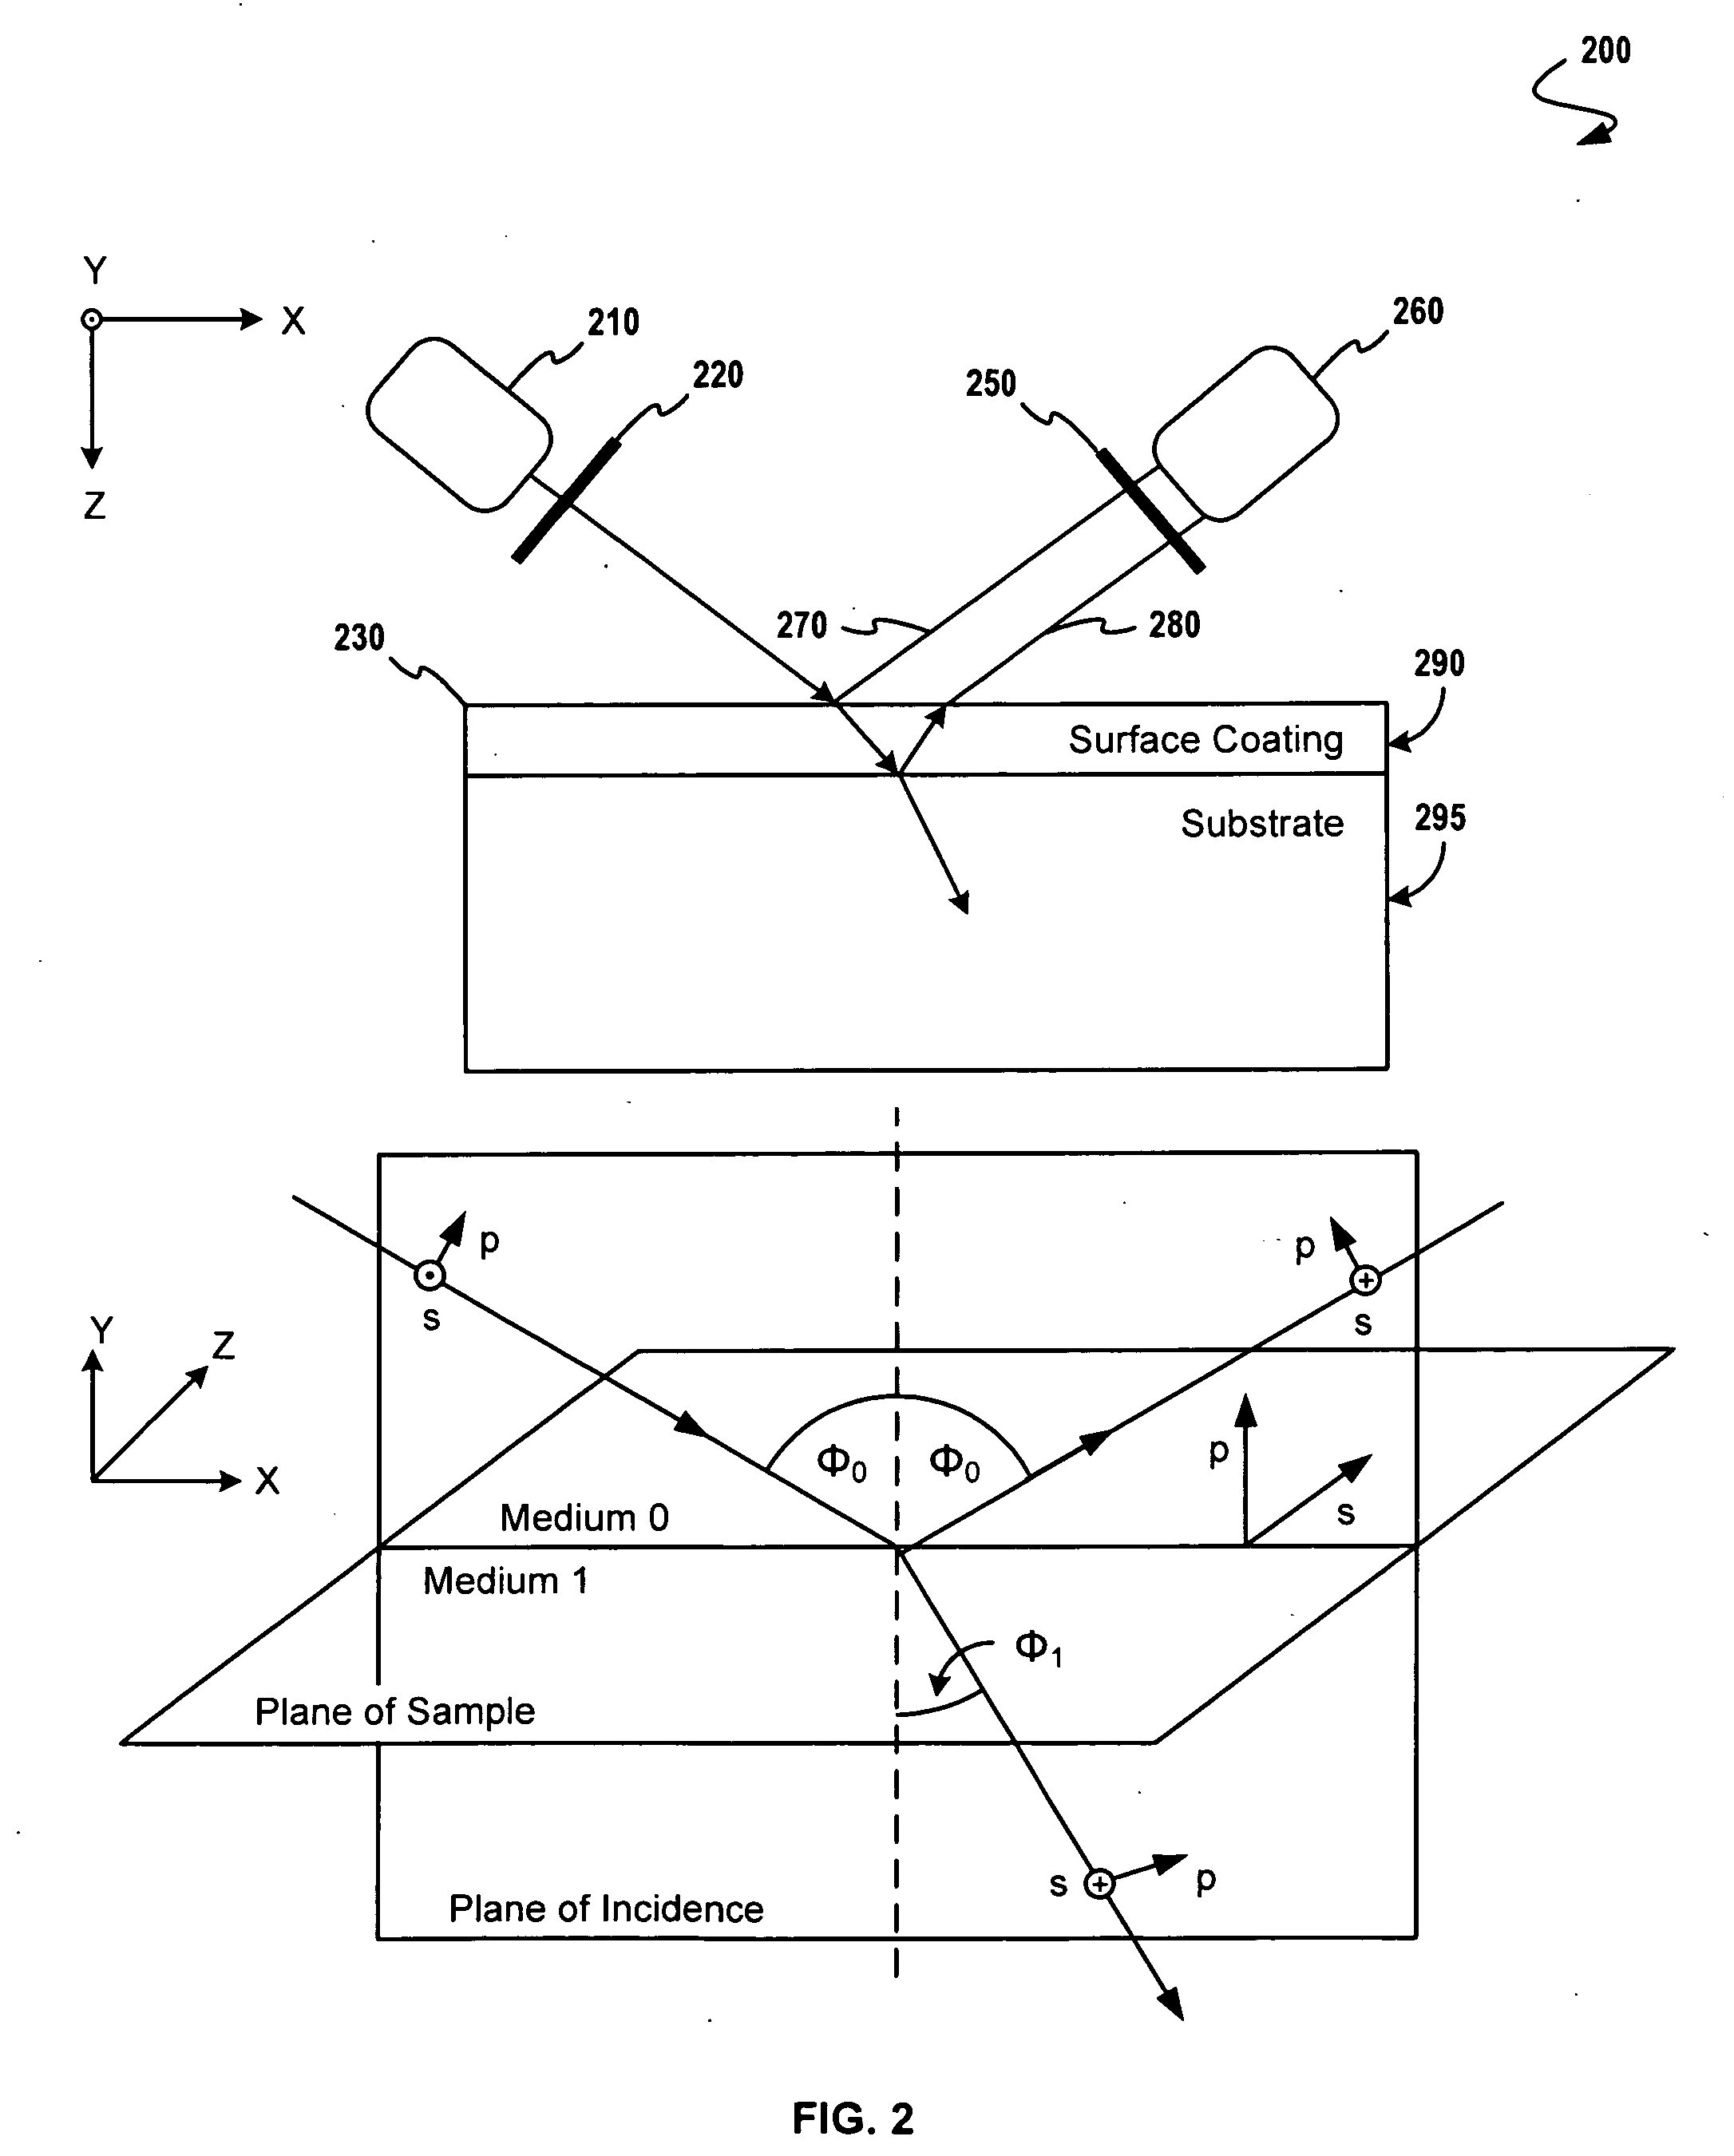 System and Method for Performing Ellipsometric Measurements on an Arbitrarily Large or Continuously Moving Sample